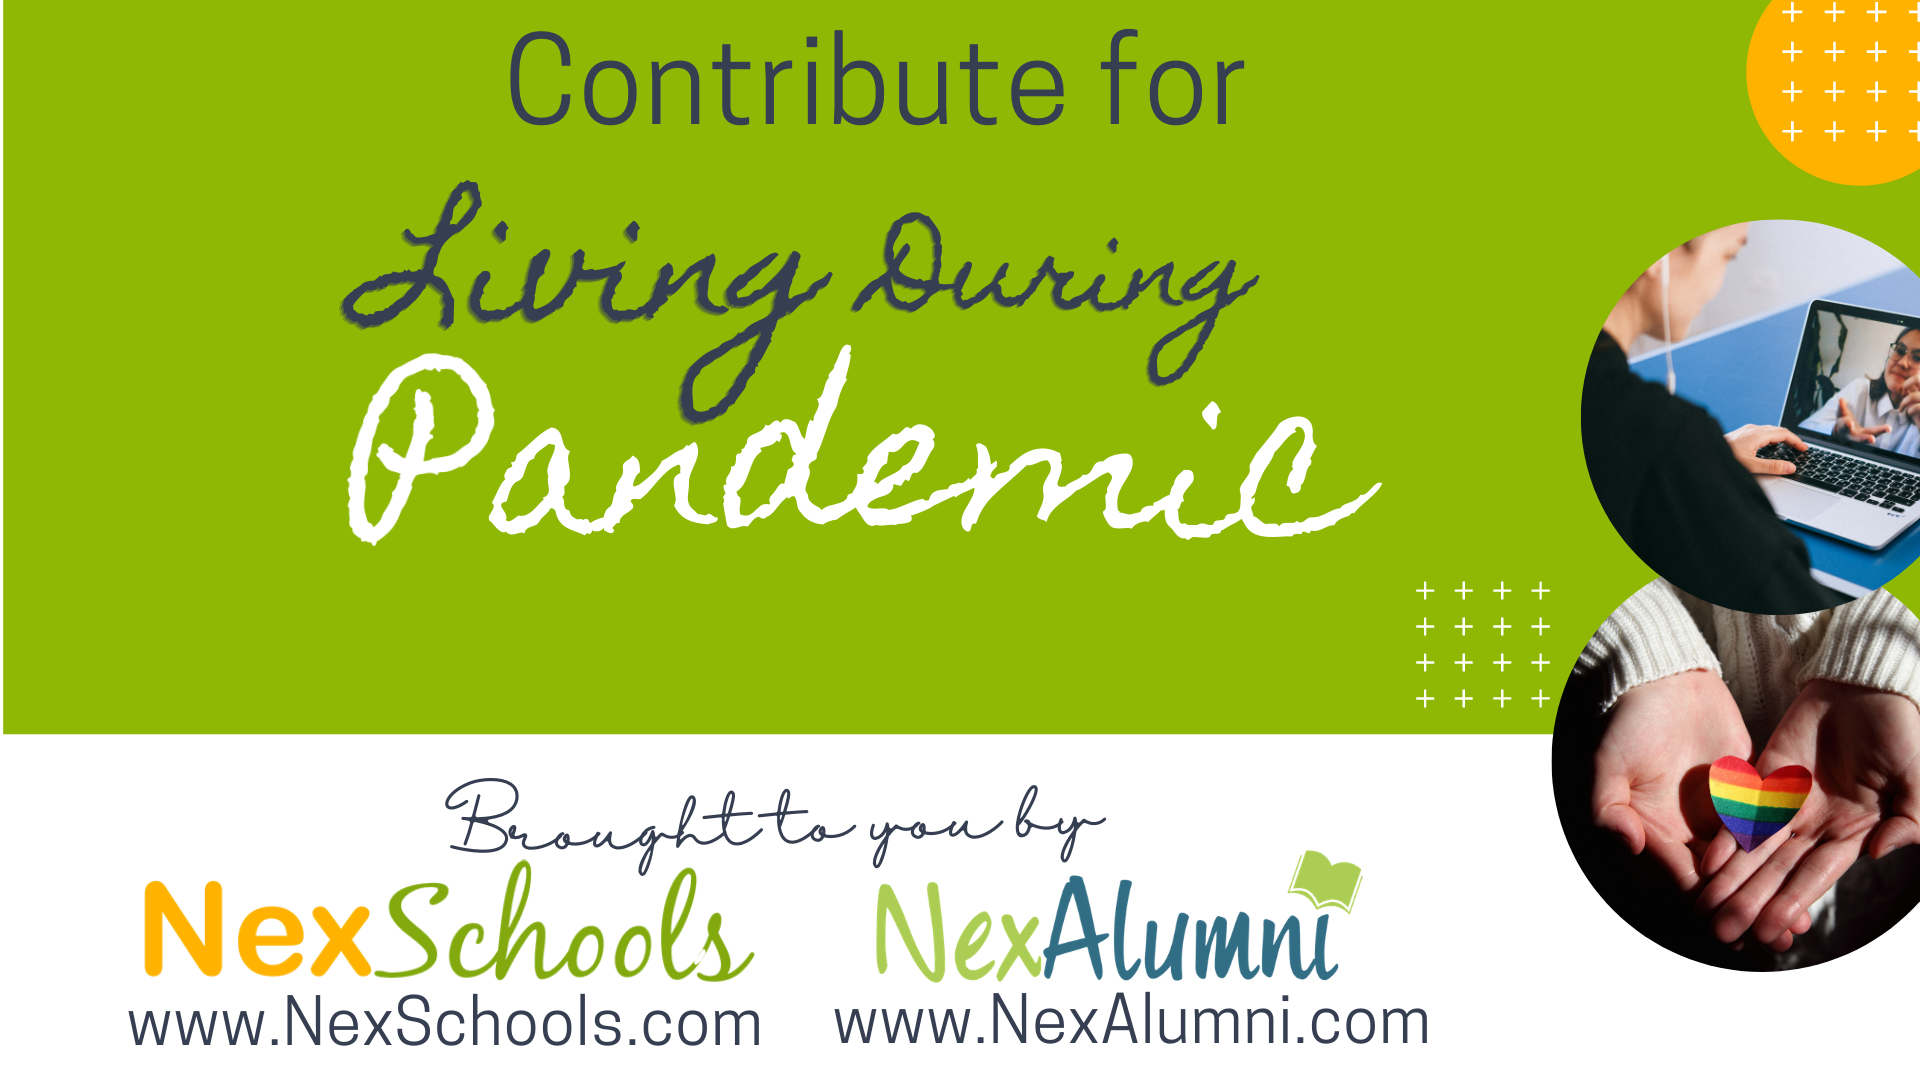 Contributions Invited for the Pandemic Moments by NexSchools,Contribute your personal experience in a video or story or personal memoir